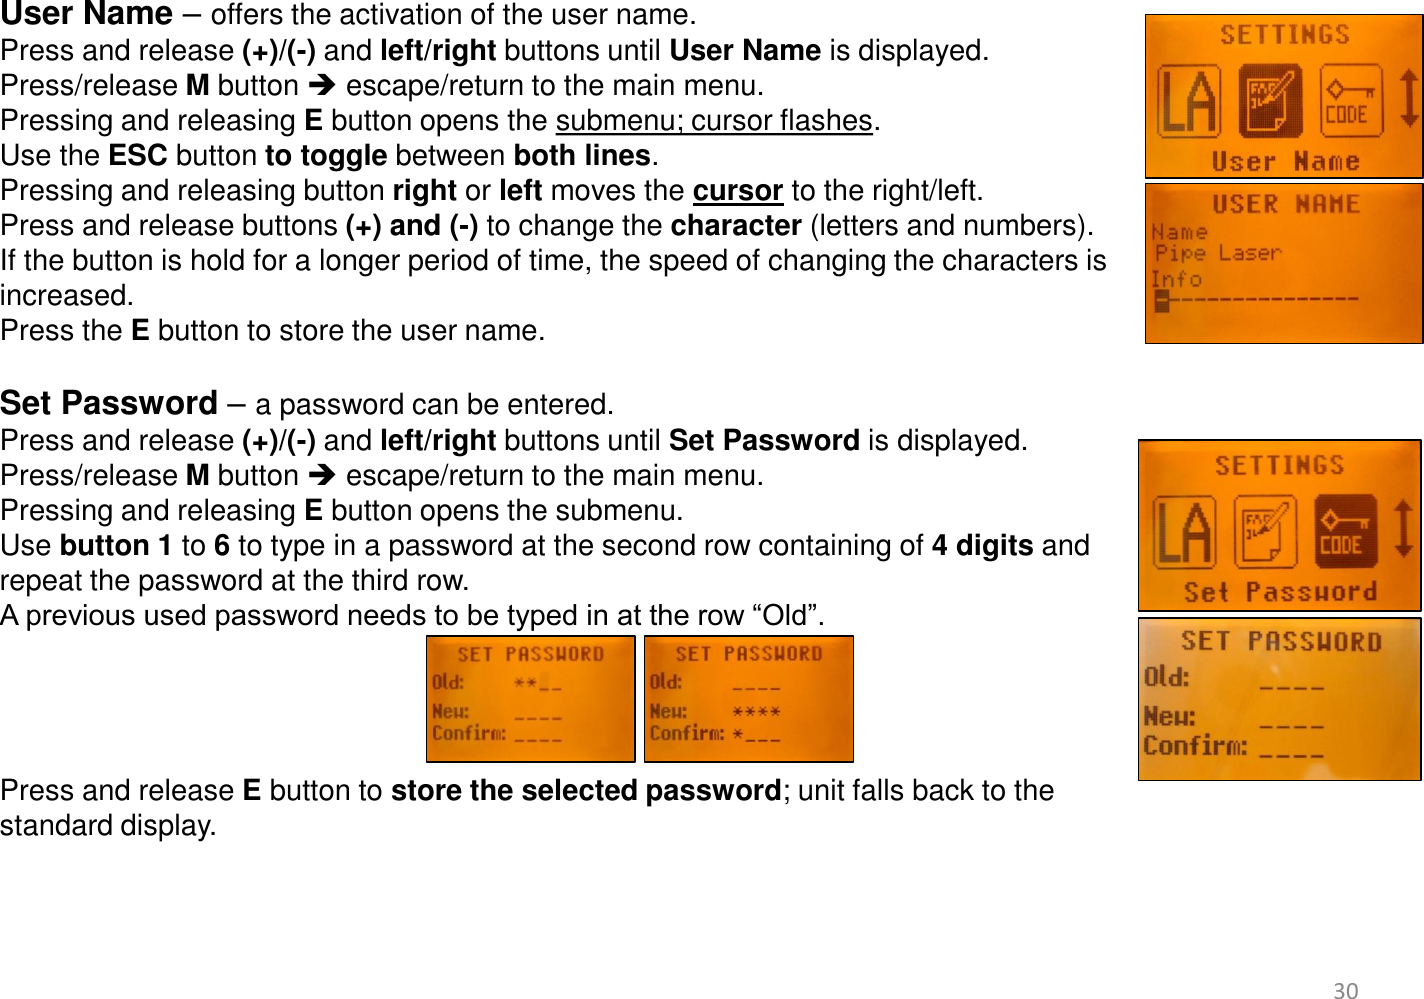 User Name – offers the activation of the user name. Press and release (+)/(-) and left/right buttons until User Name is displayed. Press/release M button  escape/return to the main menu. Pressing and releasing E button opens the submenu; cursor flashes.  Use the ESC button to toggle between both lines.  Pressing and releasing button right or left moves the cursor to the right/left. Press and release buttons (+) and (-) to change the character (letters and numbers).  If the button is hold for a longer period of time, the speed of changing the characters is  increased. Press the E button to store the user name.  Set Password – a password can be entered.  Press and release (+)/(-) and left/right buttons until Set Password is displayed.  Press/release M button  escape/return to the main menu. Pressing and releasing E button opens the submenu.  Use button 1 to 6 to type in a password at the second row containing of 4 digits and  repeat the password at the third row.  A previous used password needs to be typed in at the row “Old”.     Press and release E button to store the selected password; unit falls back to the  standard display.           30 